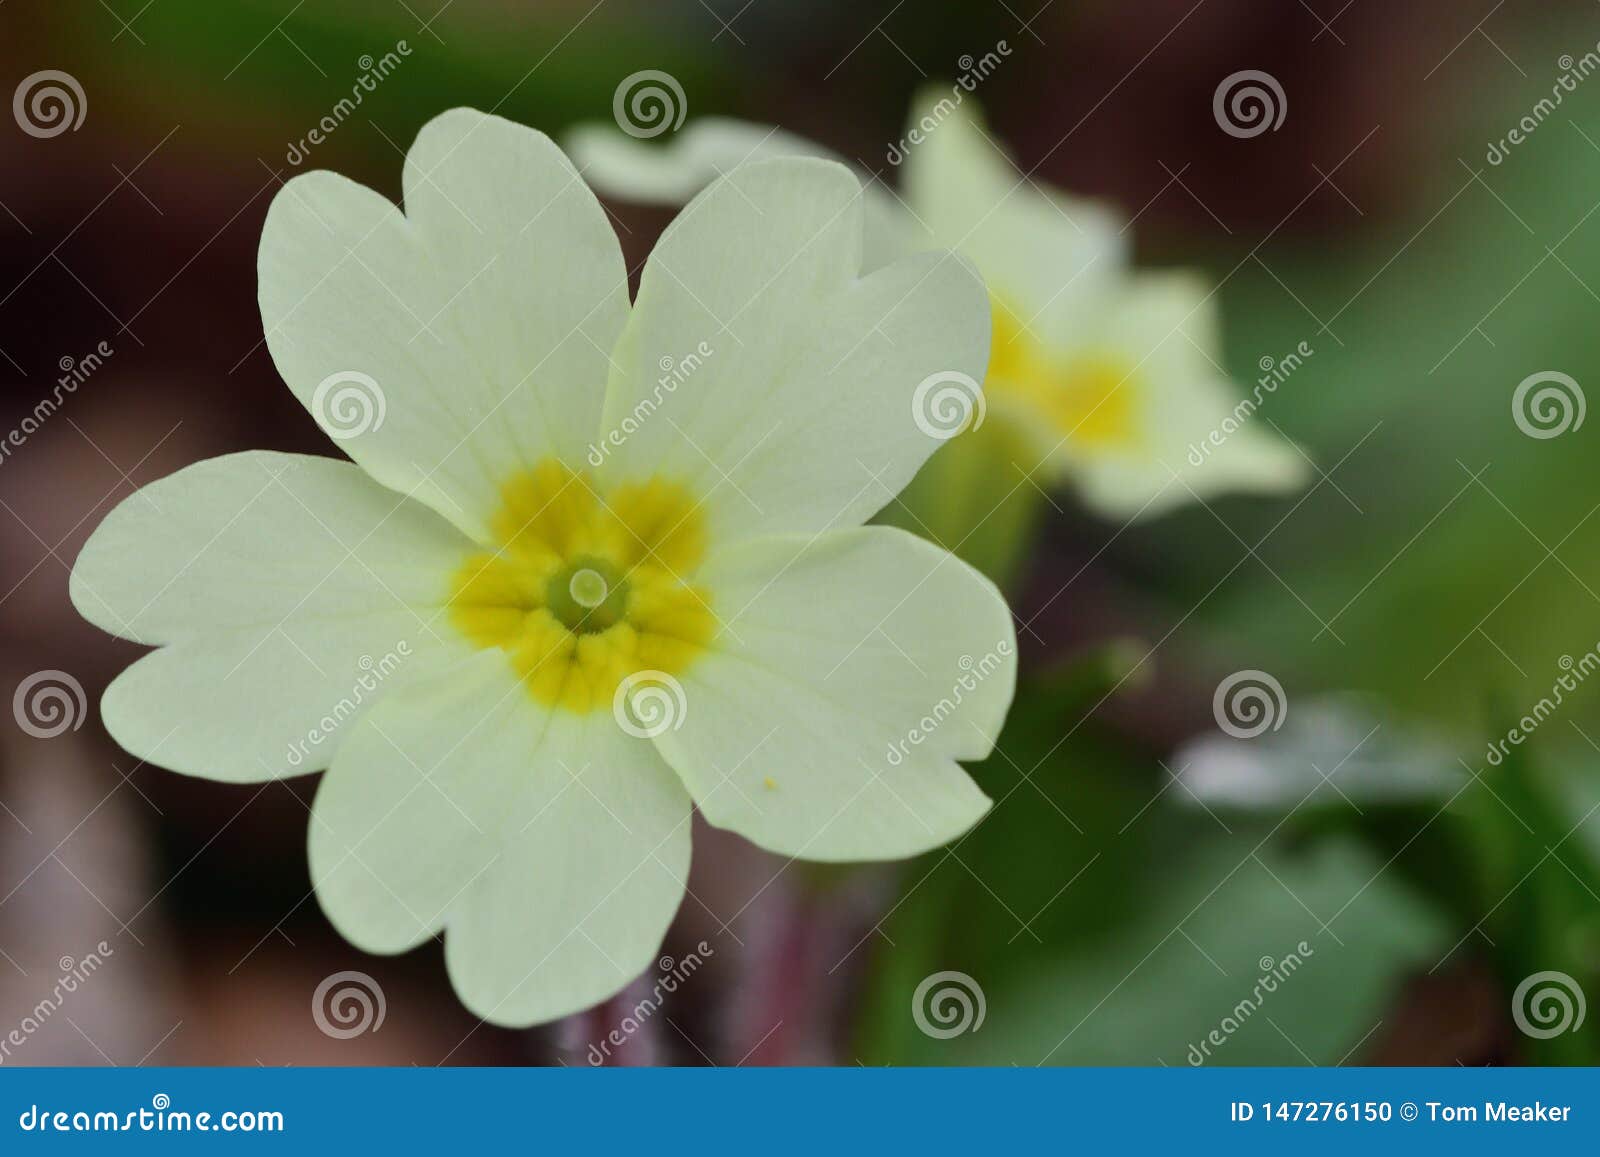 221 Common Primroses Photos Free Royalty Free Stock Photos From Dreamstime